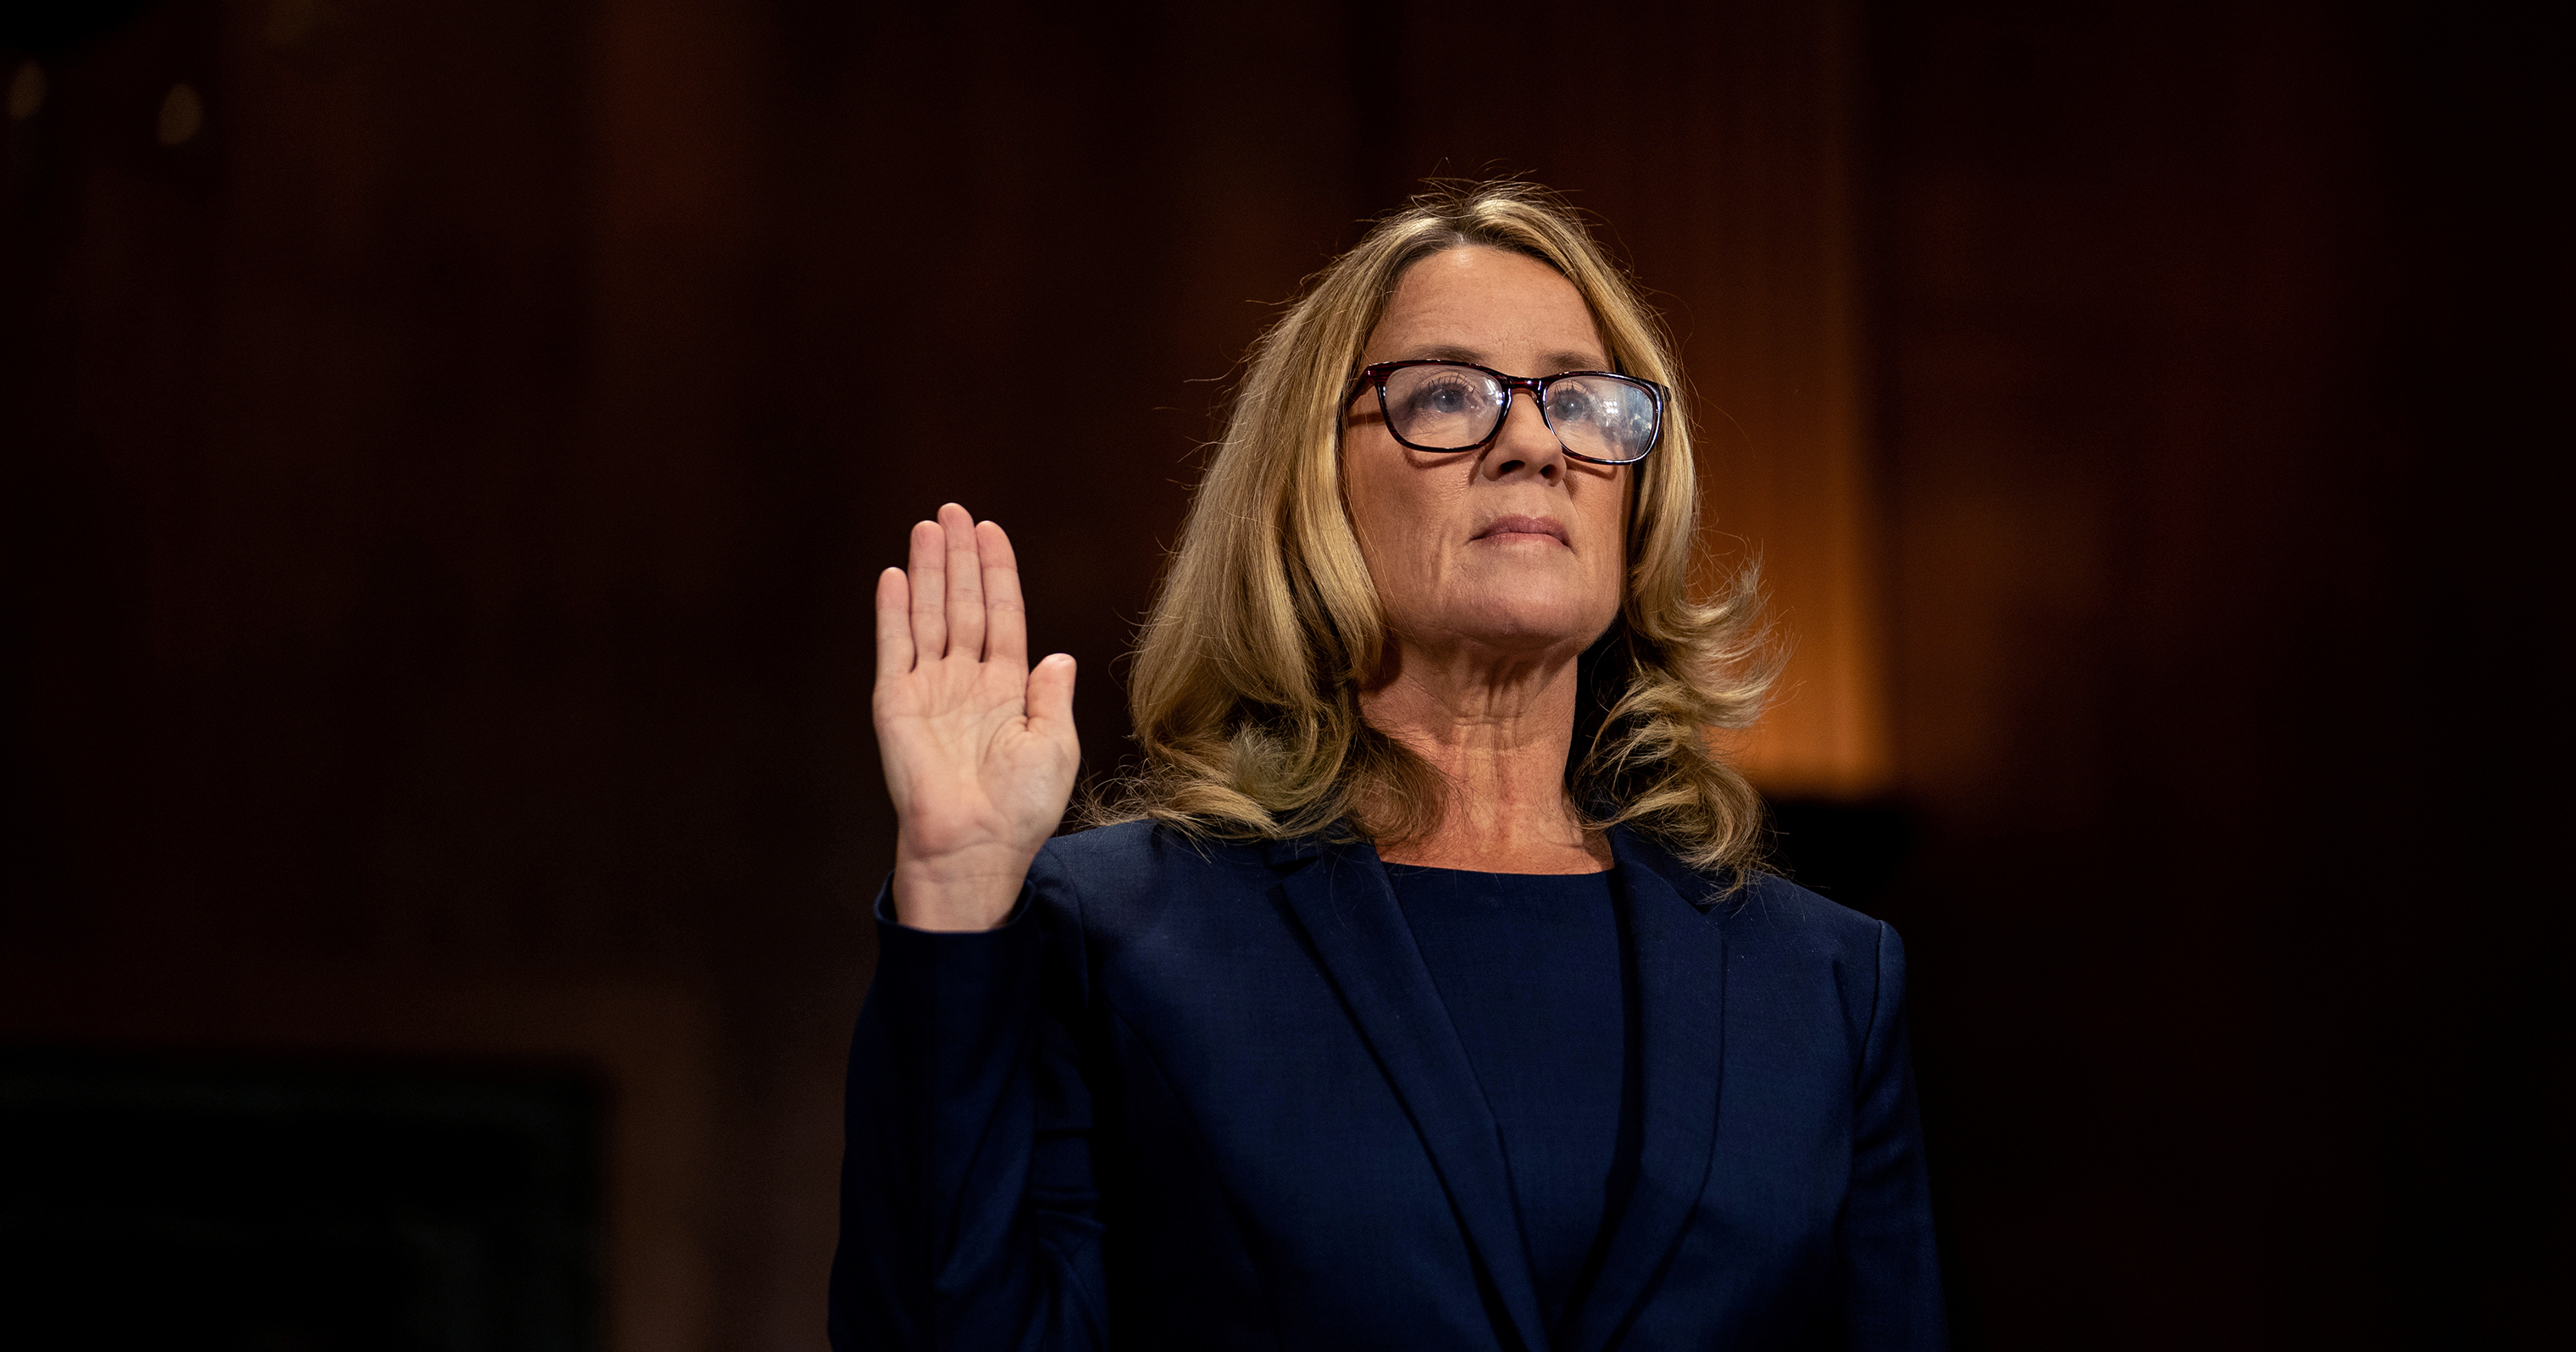 Christine Blasey Ford swears in at a Senate Judiciary Committee hearing for her to testify about sexual assault allegations against Supreme Court nominee Judge Brett Kavanaugh on Capitol Hill in Washington on Sept. 27. (Erin Schaff for The New York Times/Pool/Reuters)